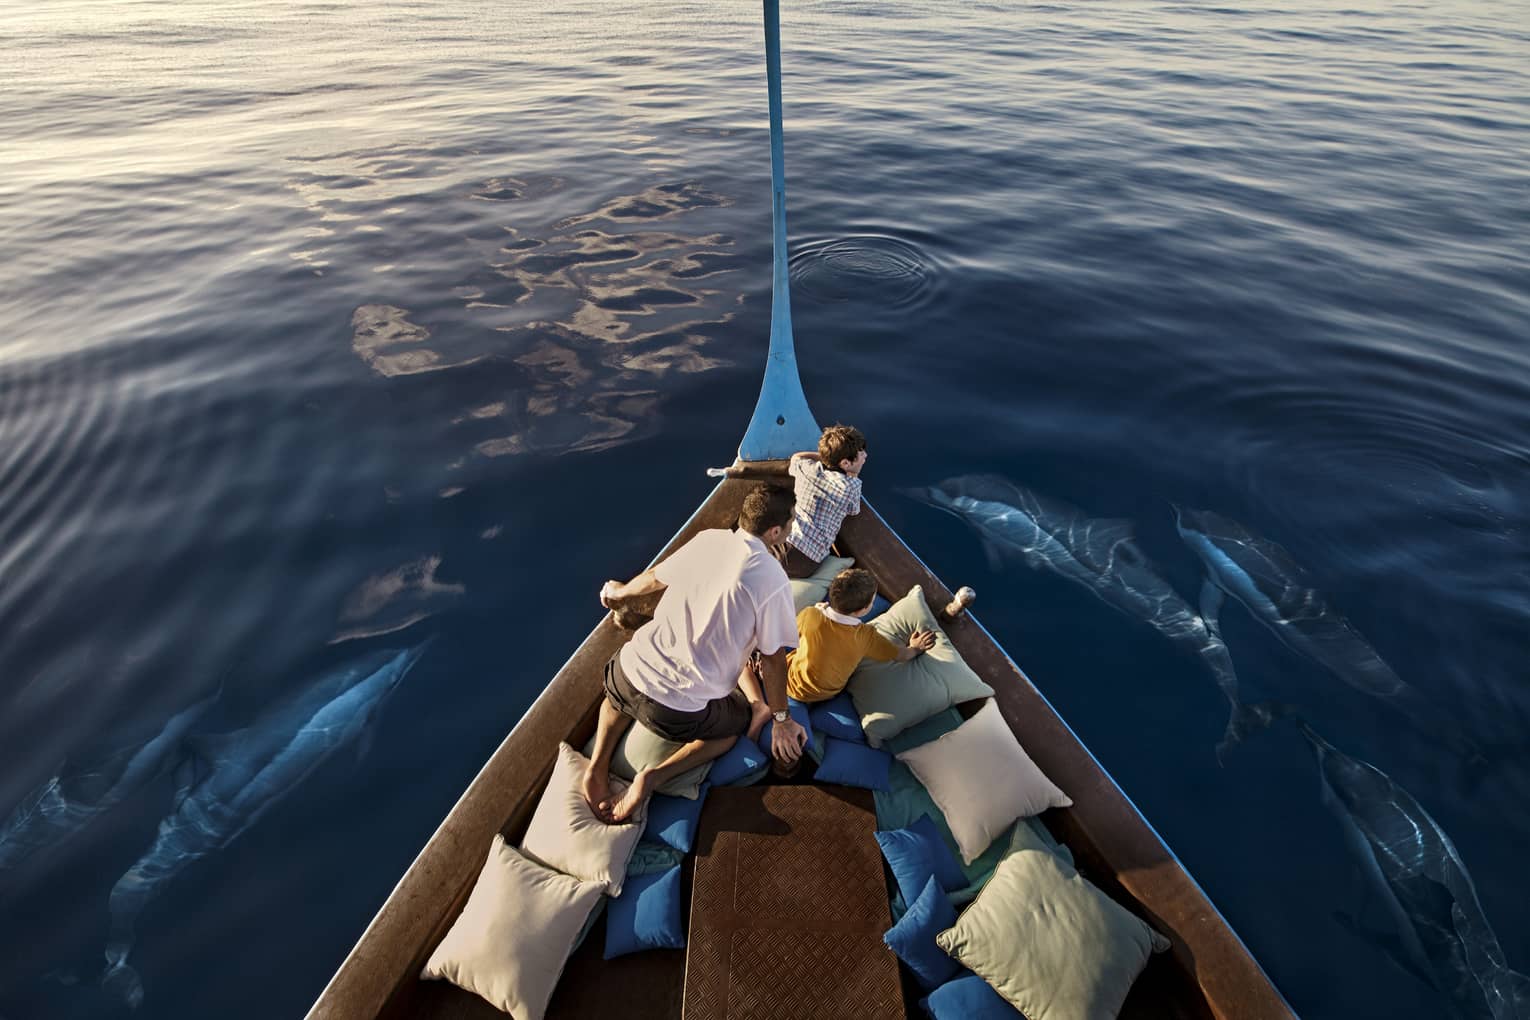 A man and two boys sit in a boat lined with blue and white pillows as dolphins swim around them